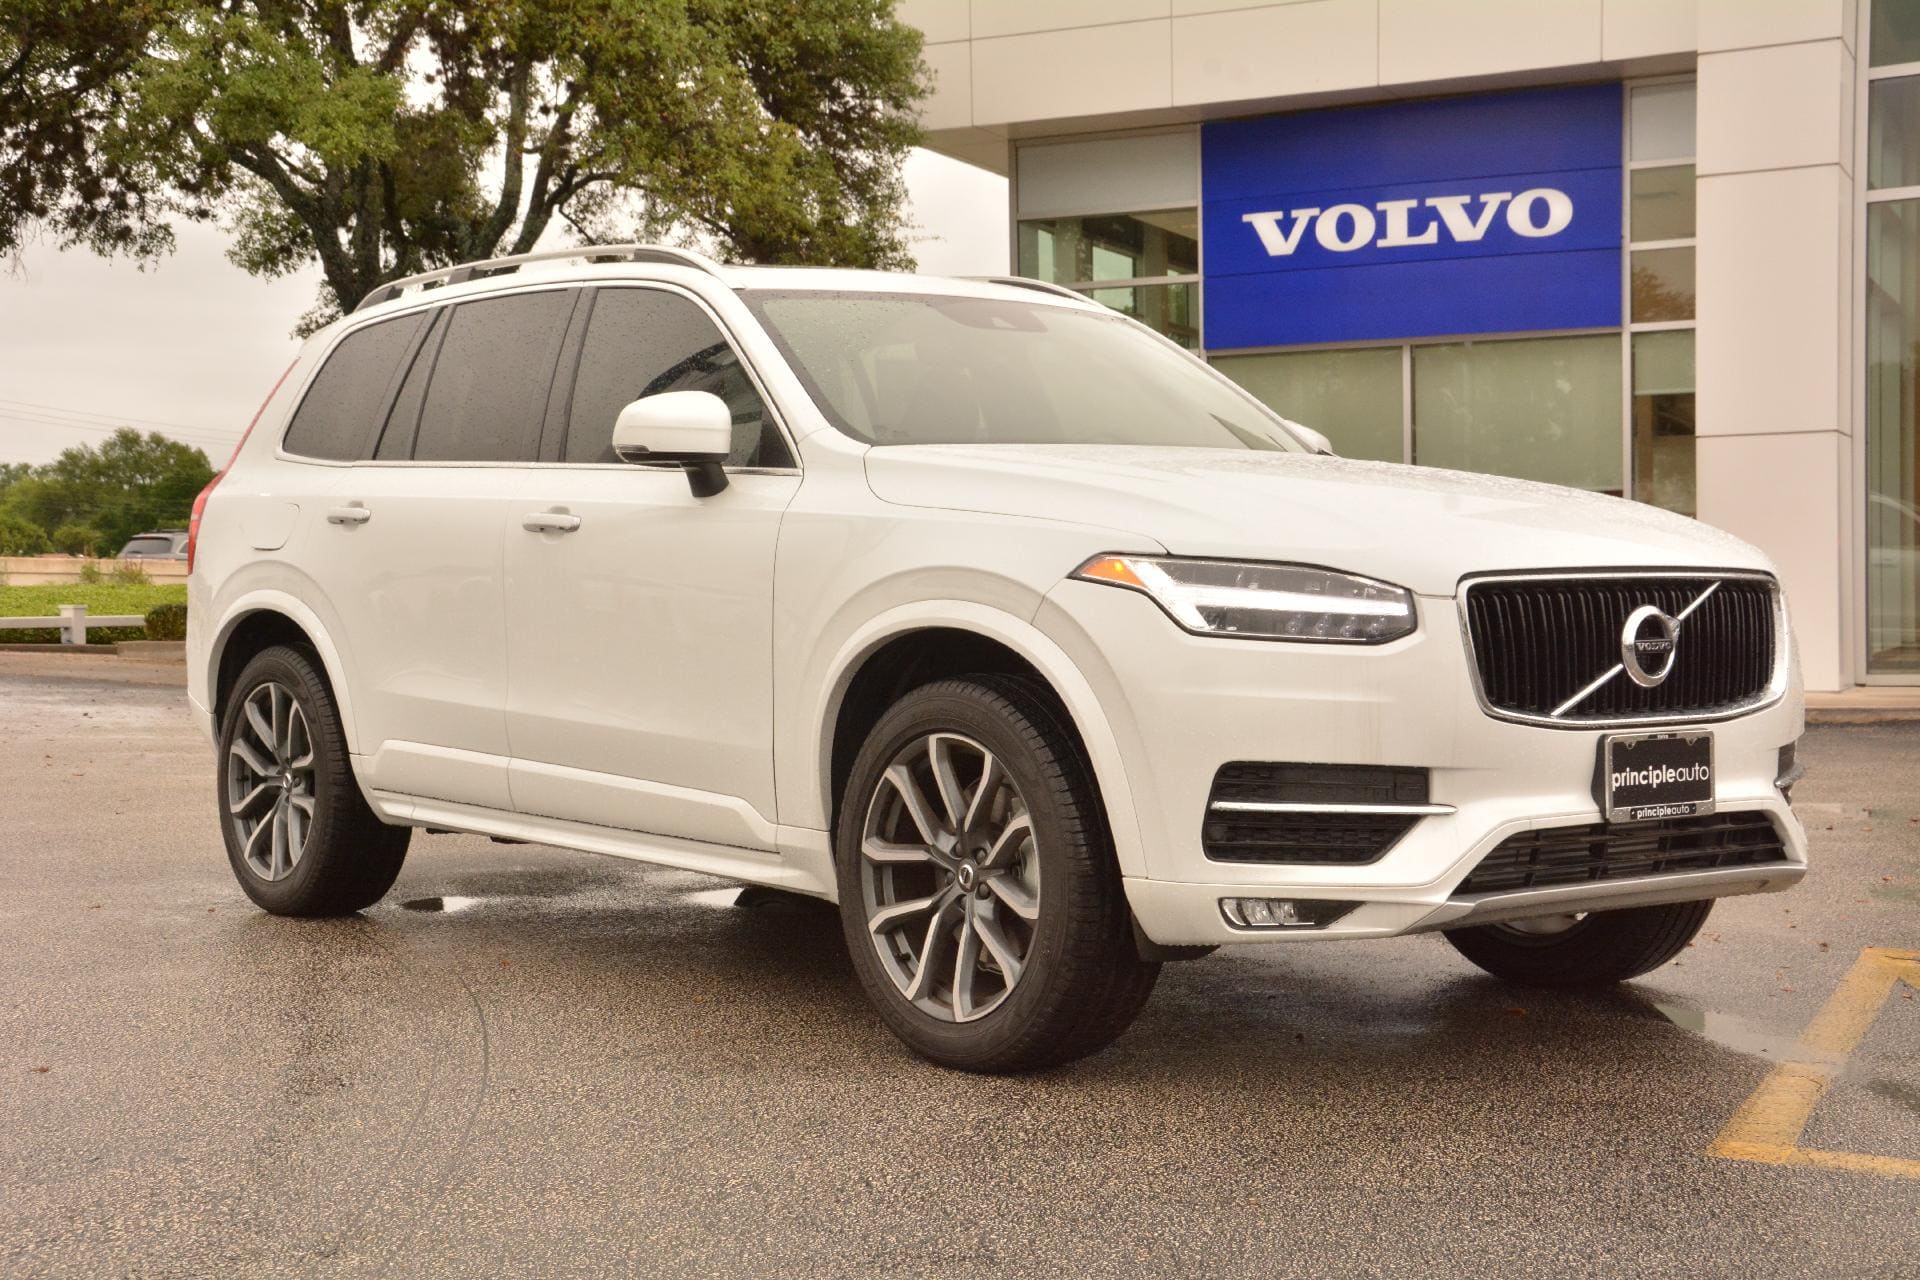 New 2019 Volvo XC90 T6 Momentum SUV For Sale K1443457